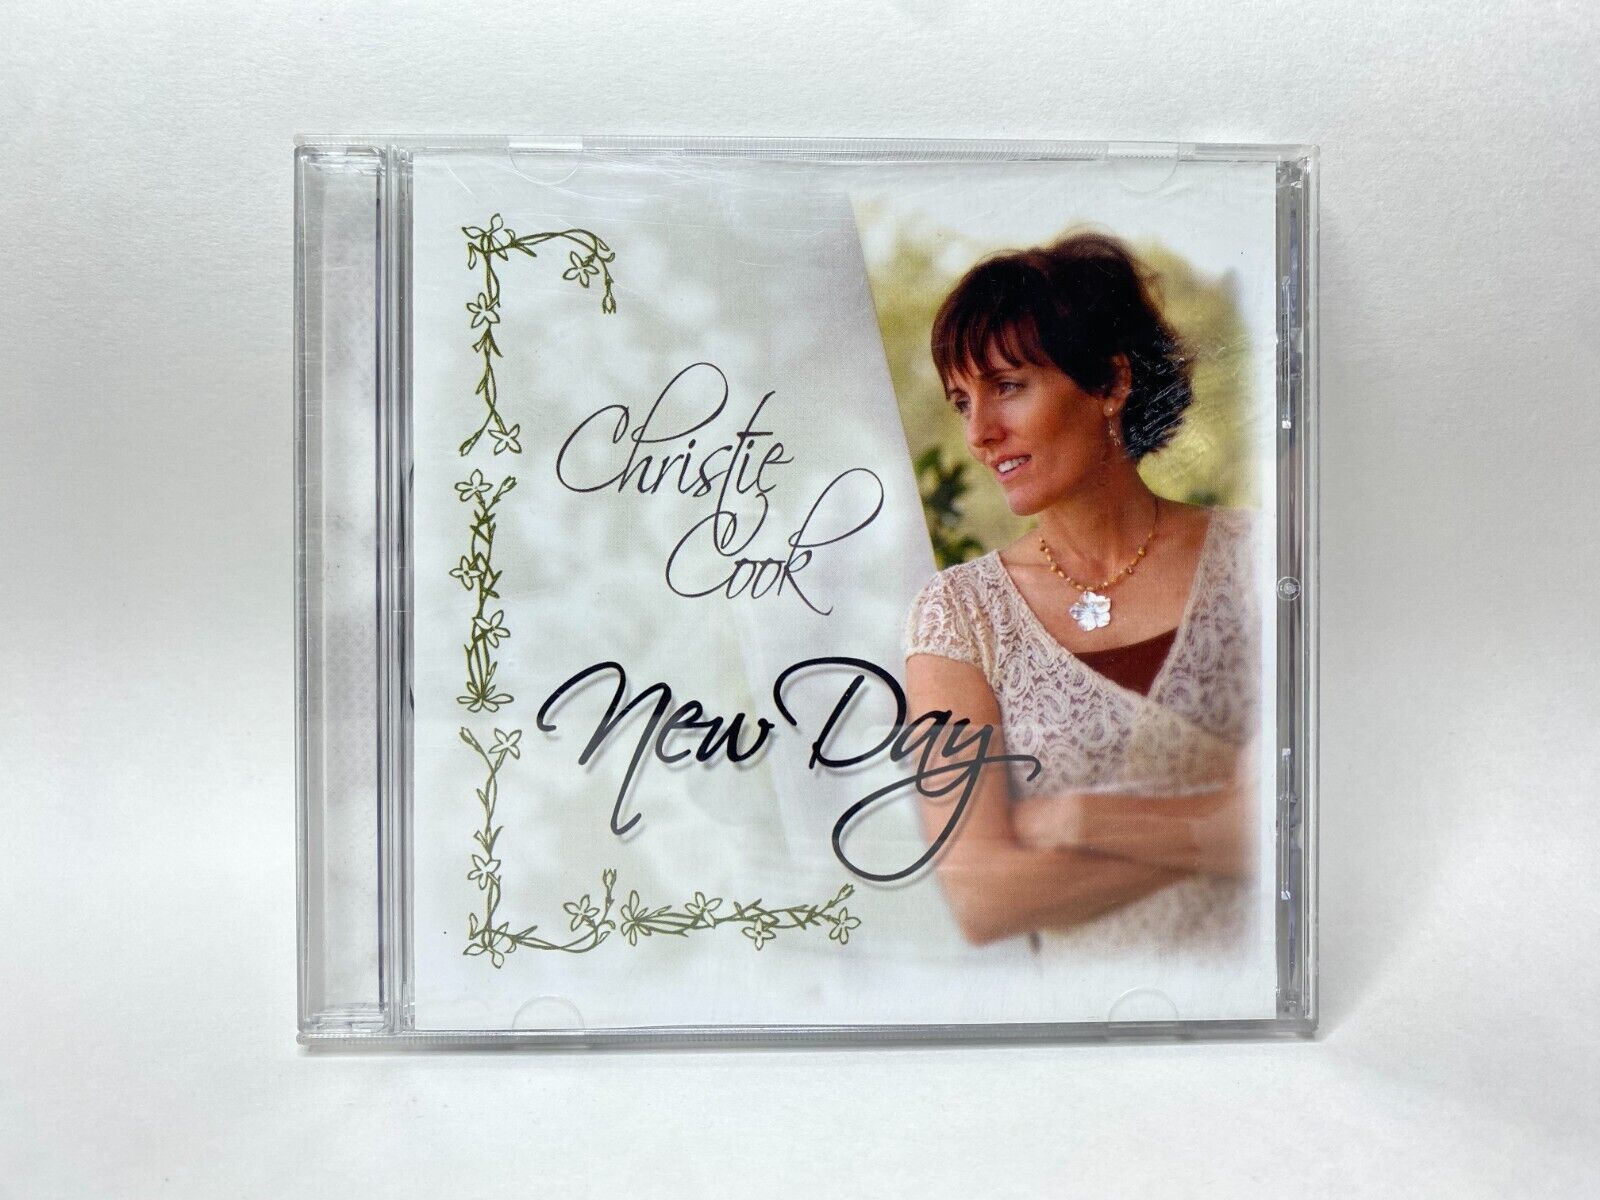 Primary image for New Day by Christie Cook (Gospel Music CD, 2008)